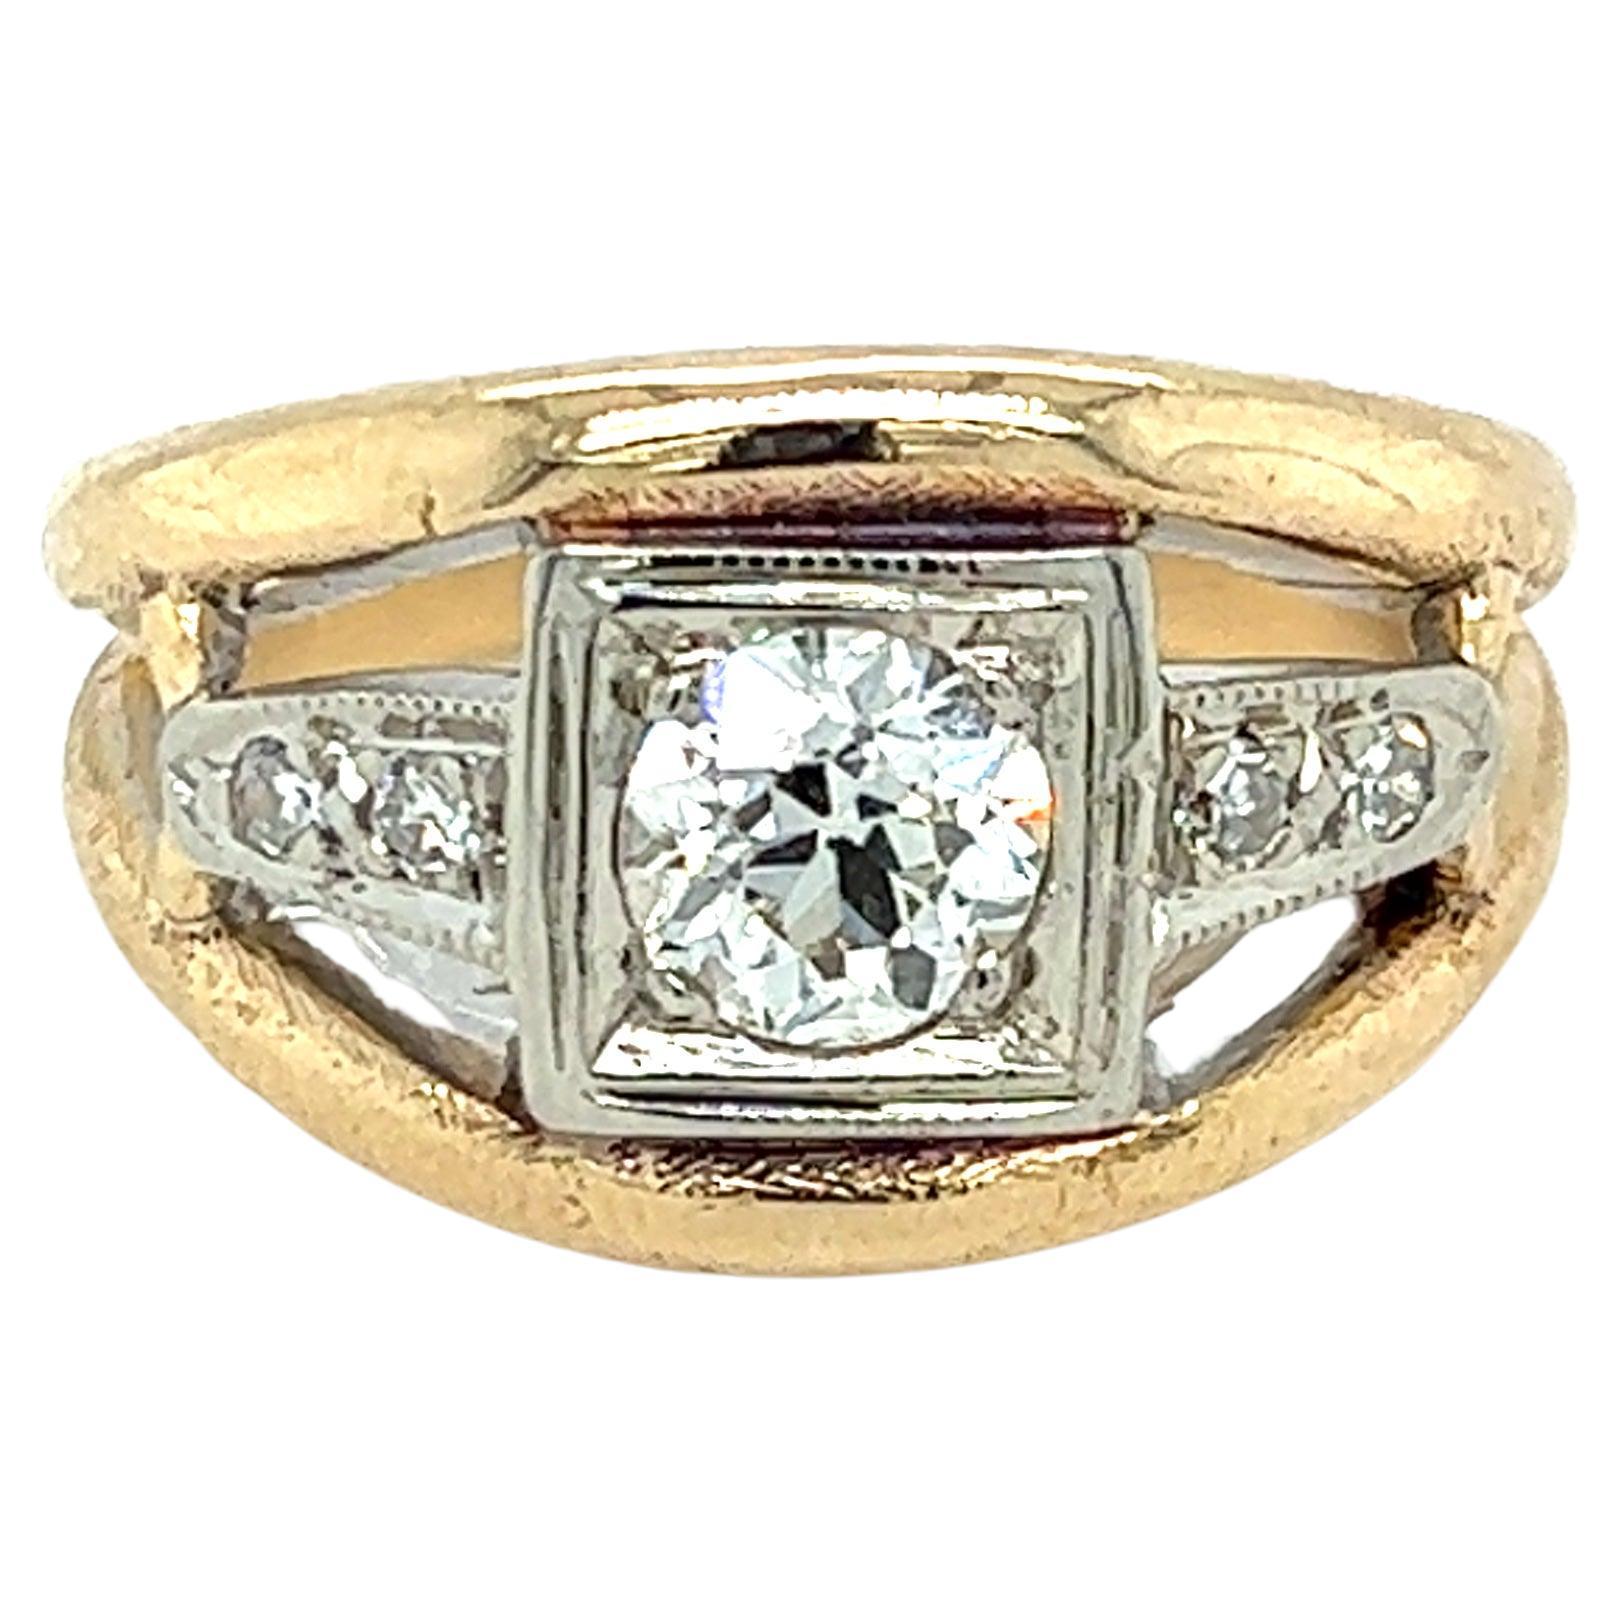 One 14 karat yellow and white gold (stamped 14K) custom design ring set with one old European cut diamond, approximately 0.76 carat with J color and SI1 clarity and four (4) single cut diamonds, approximately 0.12 carat total weight with matching